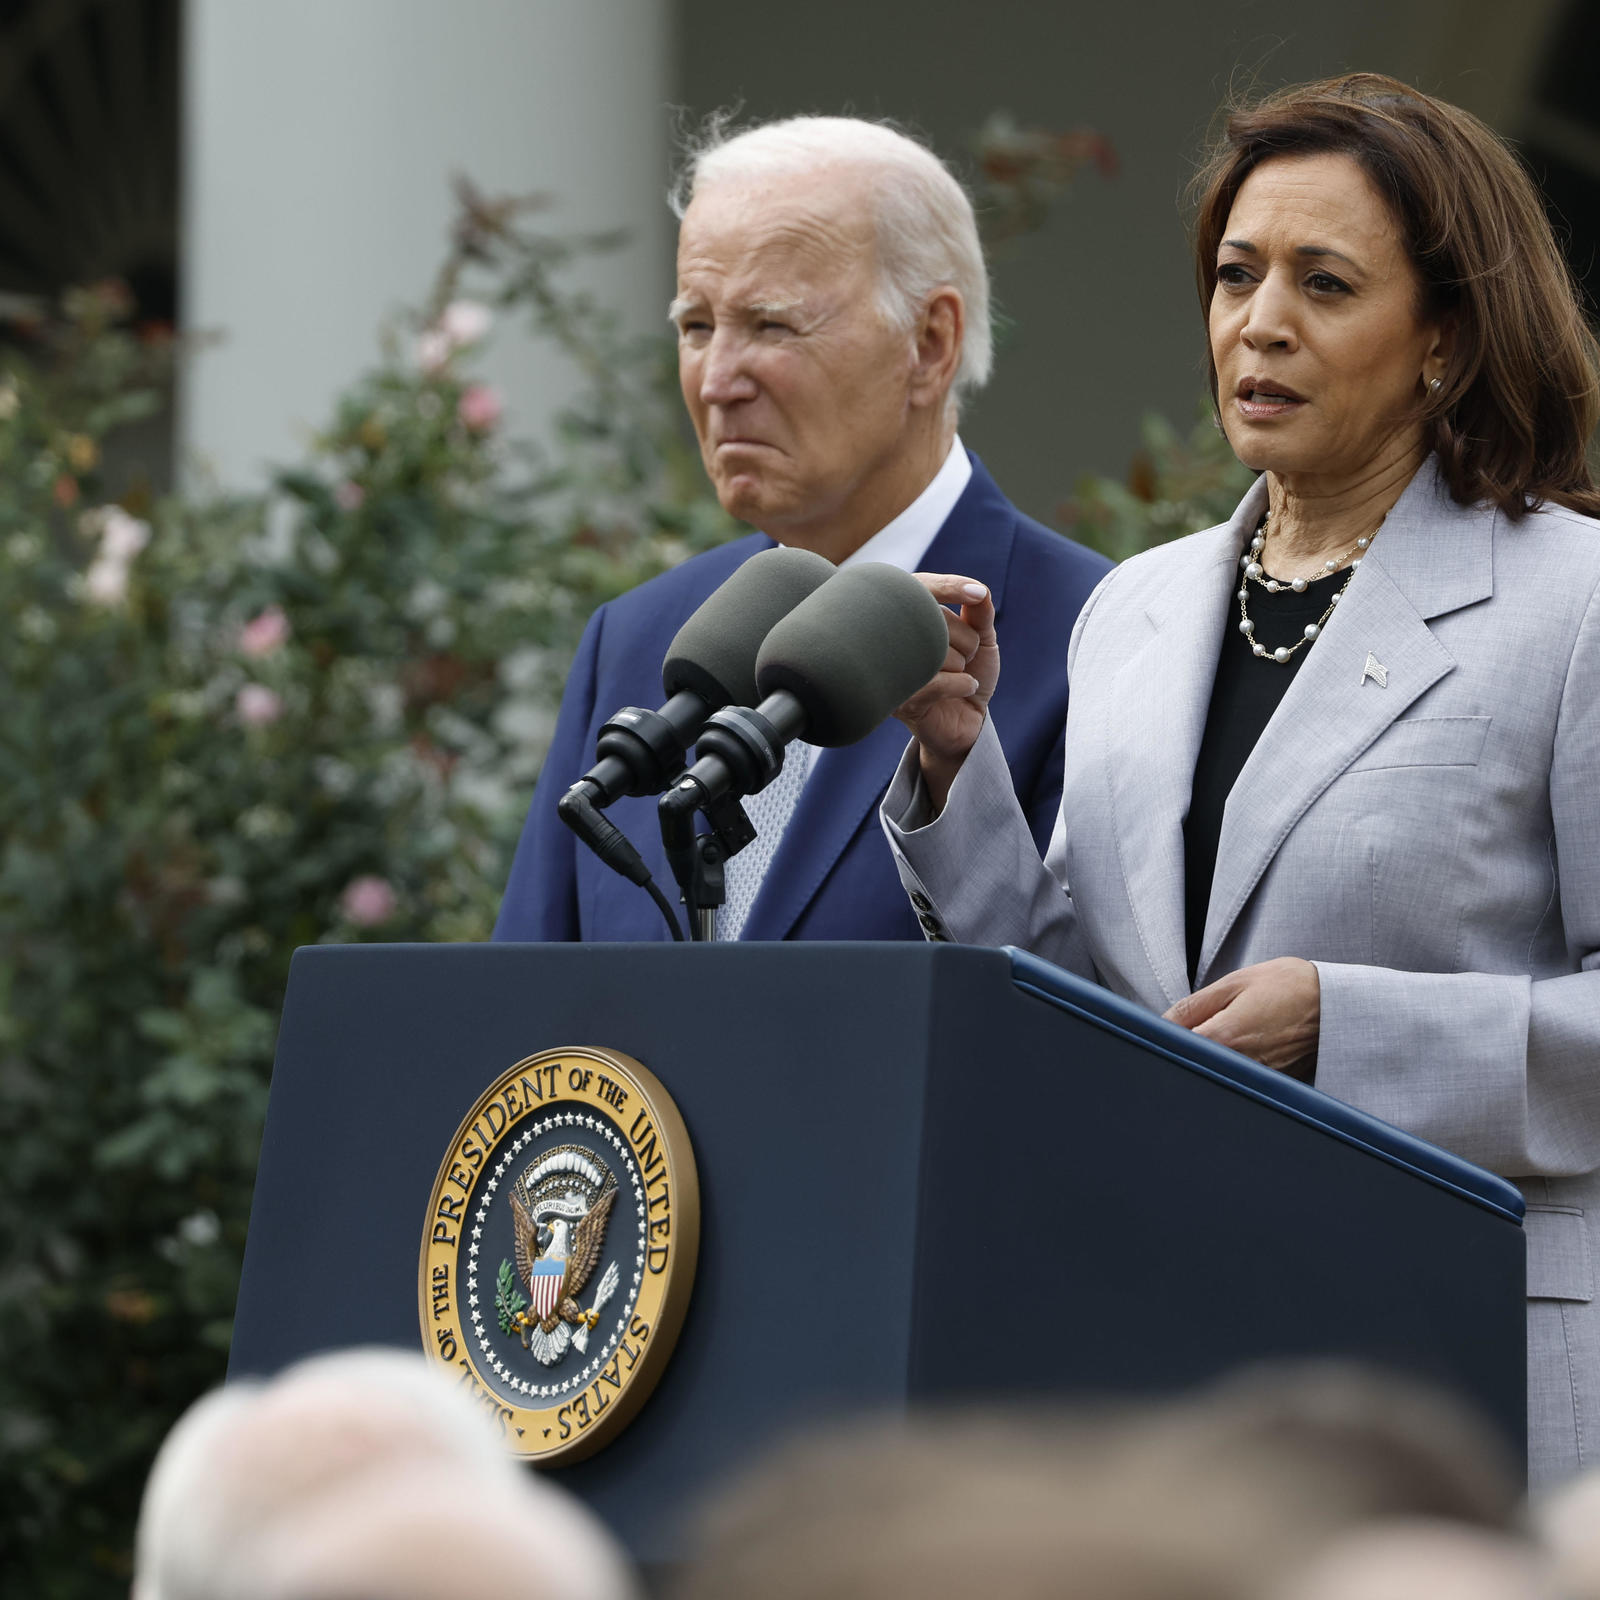 biden campaign to unveil effort to push abortion rights ahead of roe anniversary